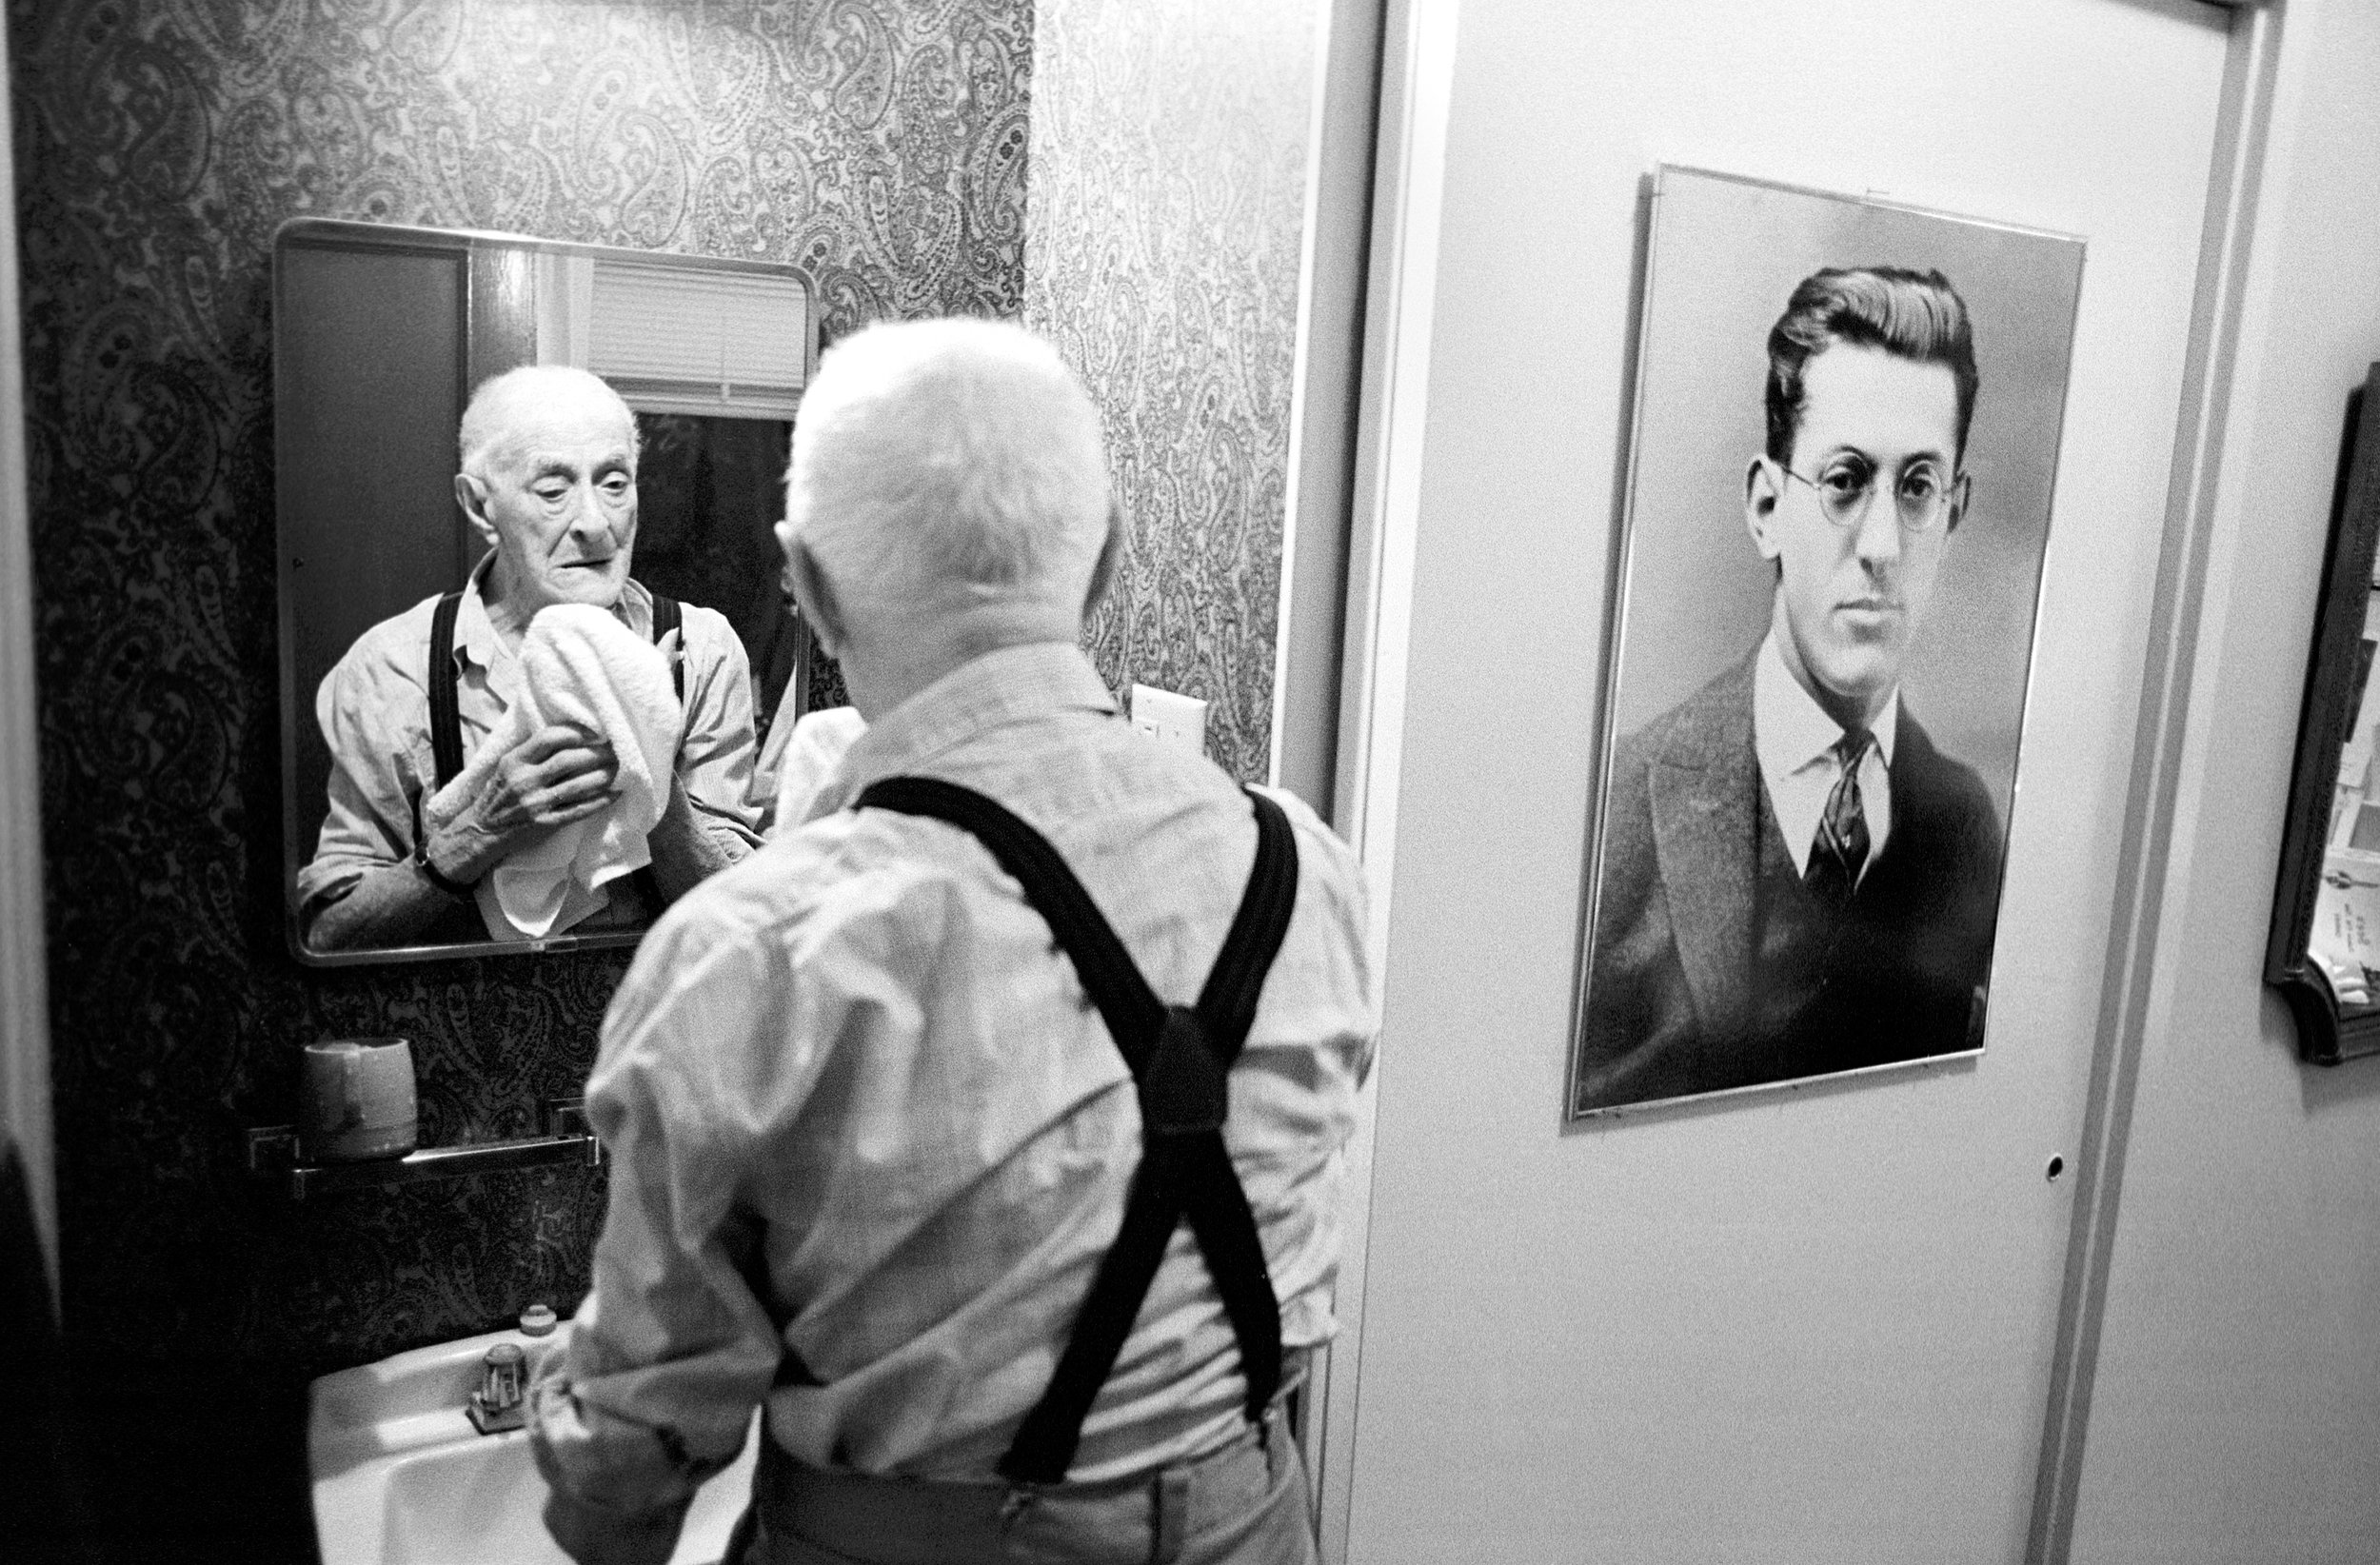  100-year-old Isaac Donner next to an old photograph of himself in the single-room occupancy hotel where he lives. 1999 